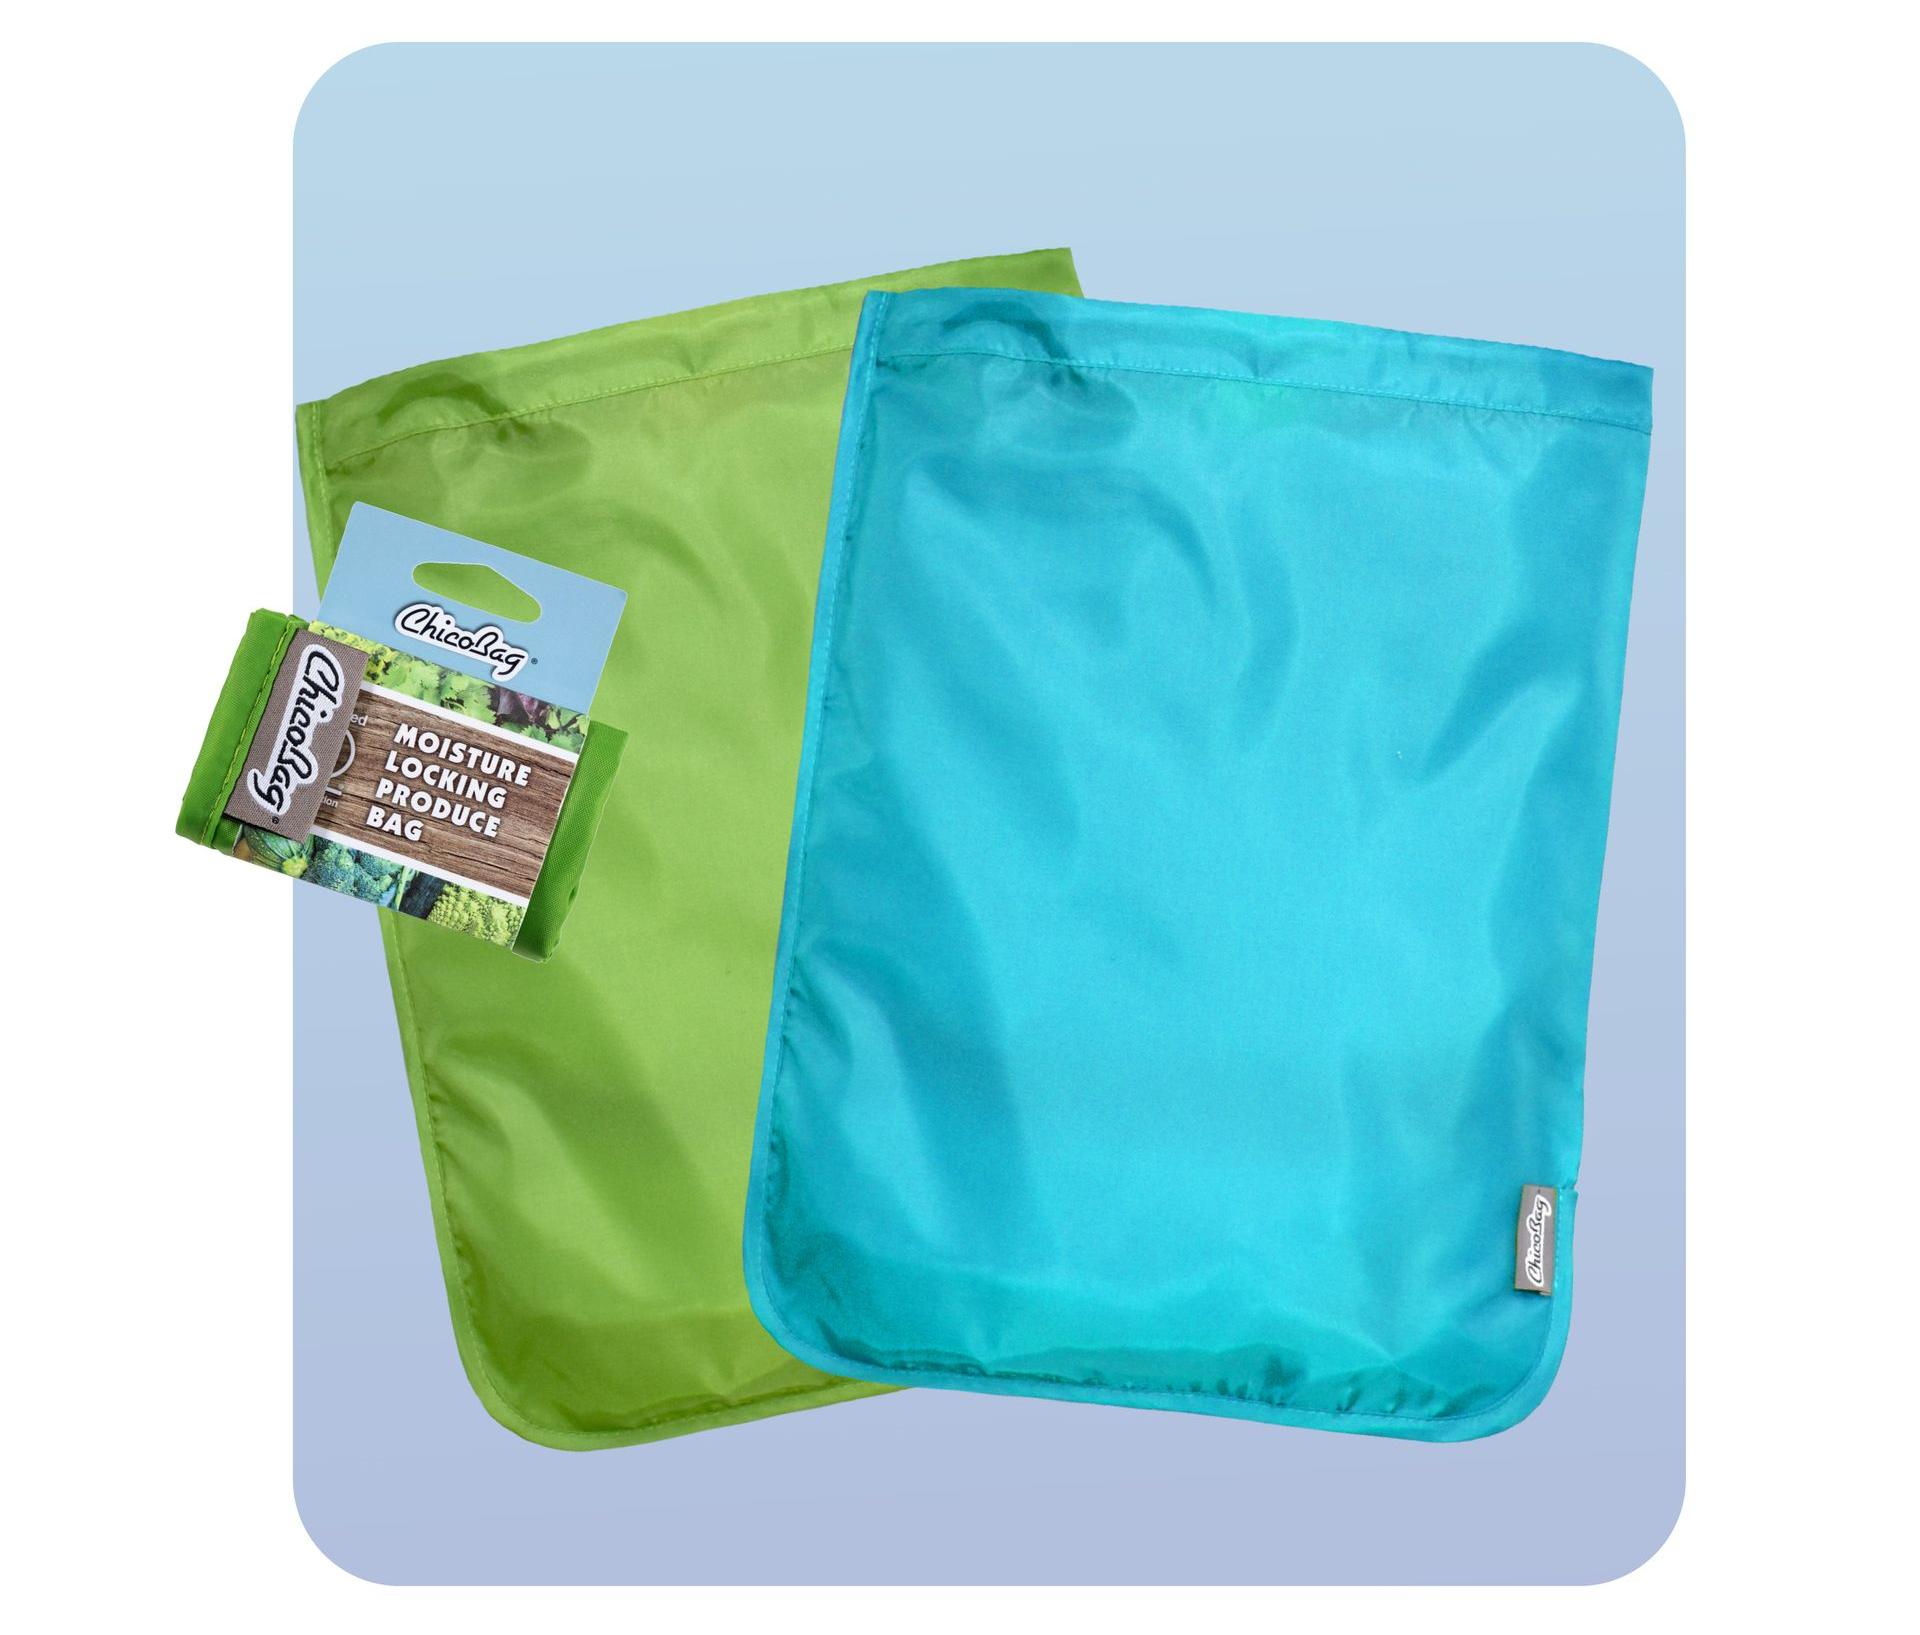 Chicoba's Moisture Locking bags shown in blue and green 